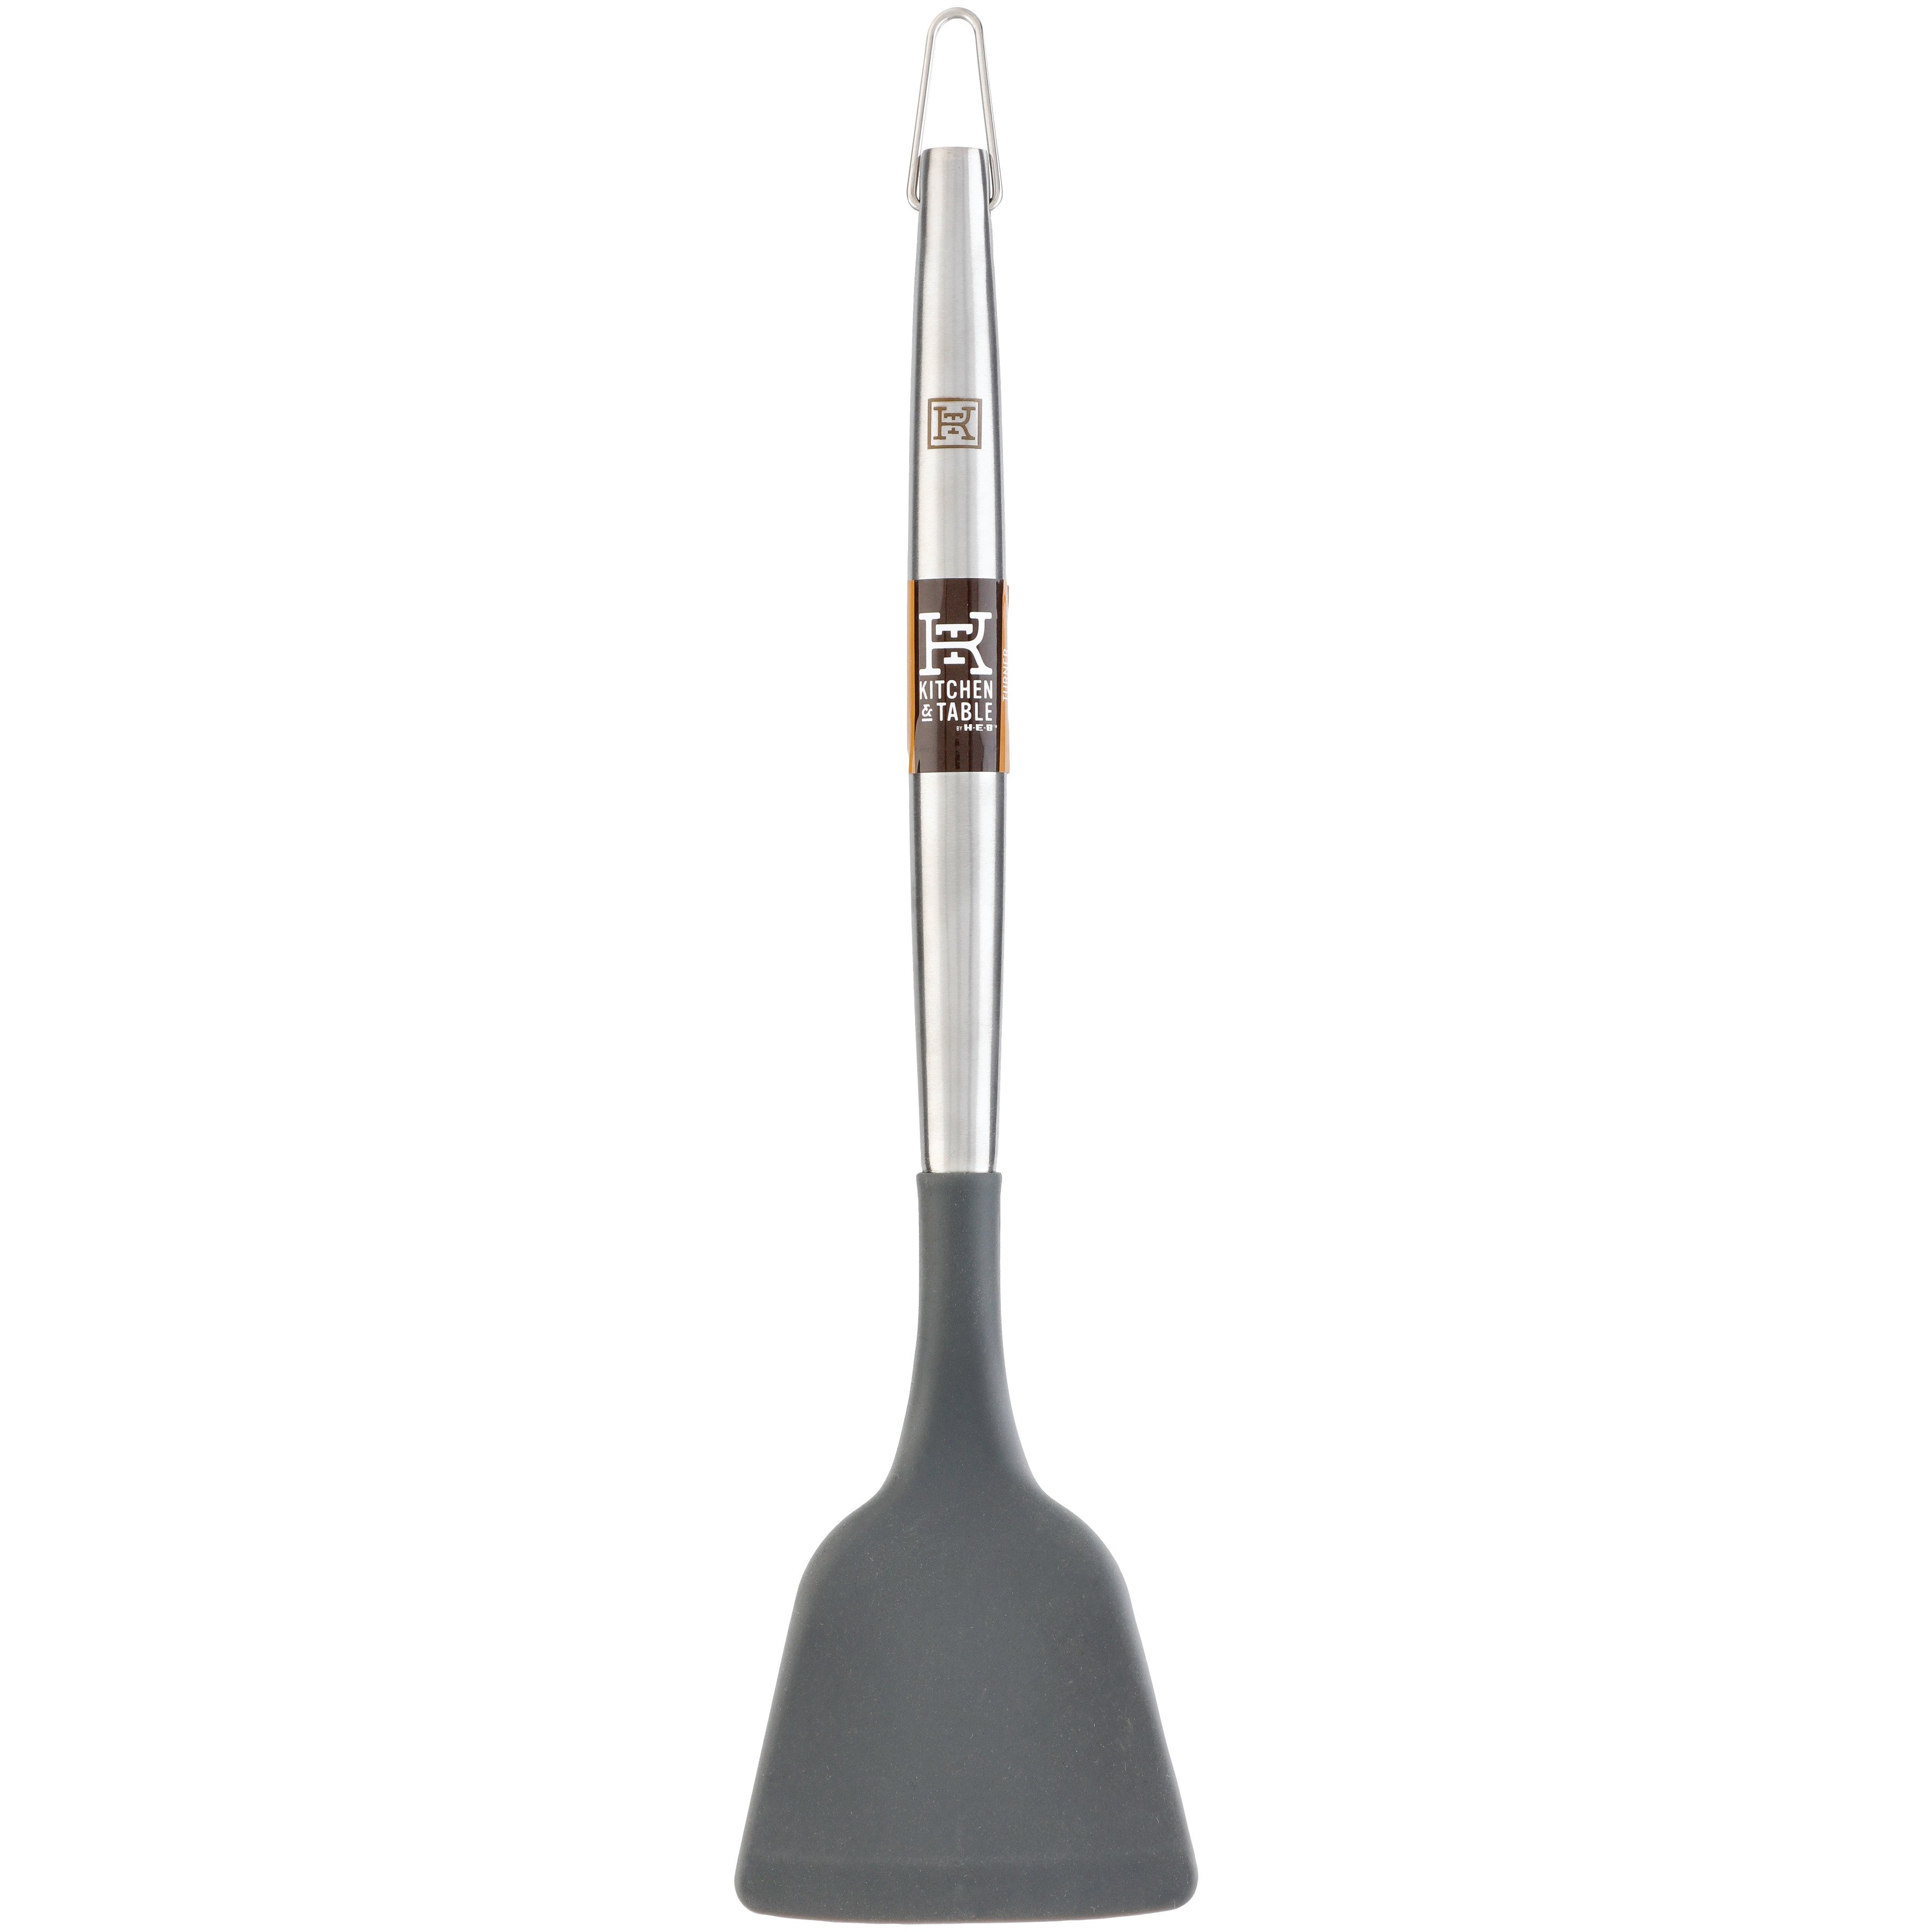 Debra's Kitchen Made in USA Heat Resistant Slotted Turner Spatula, 13inch